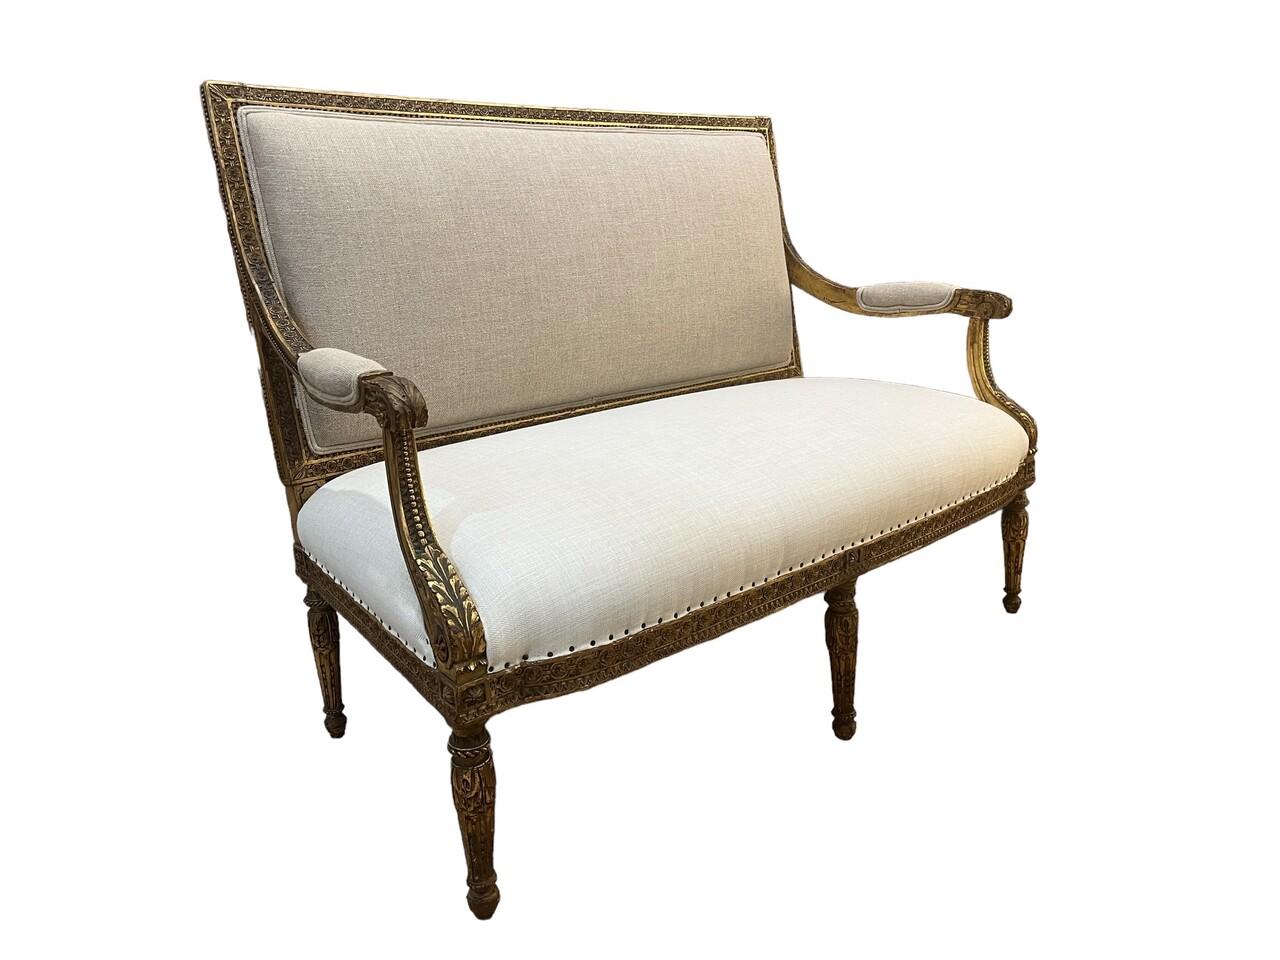 This Louis XVI Style Giltwood Settee exudes timeless elegance with its intricate giltwood frame, meticulously crafted in the 18th-century French aesthetic. Adorned with delicate carvings and fluted legs, it epitomizes the neoclassical refinement